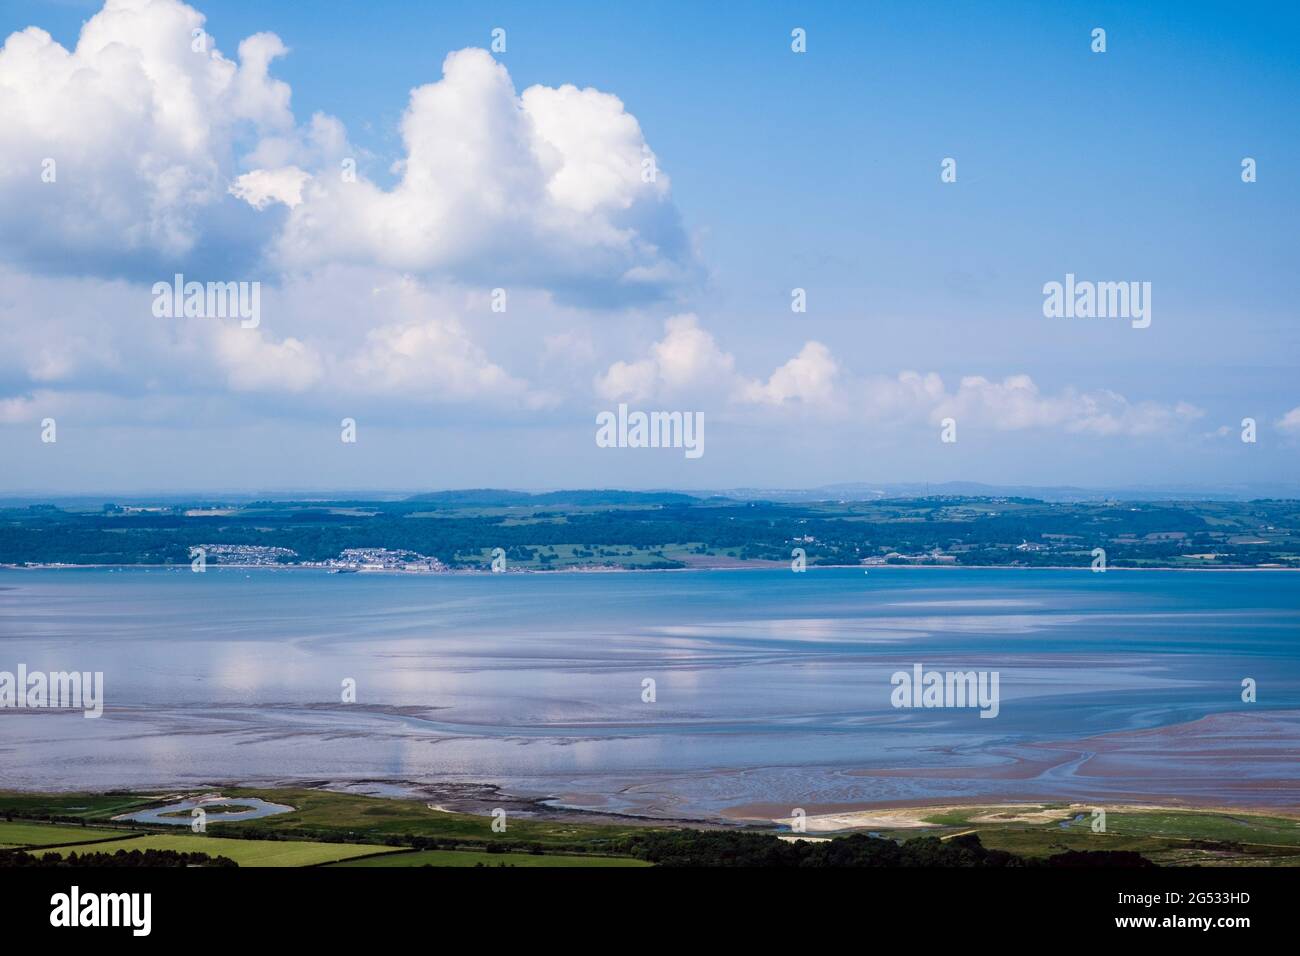 High view across Lavan Sands in Menai Strait to Beaumaris on Isle of Anglesey from above Llanfairfechan, Conwy, north Wales, UK, Britain Stock Photo